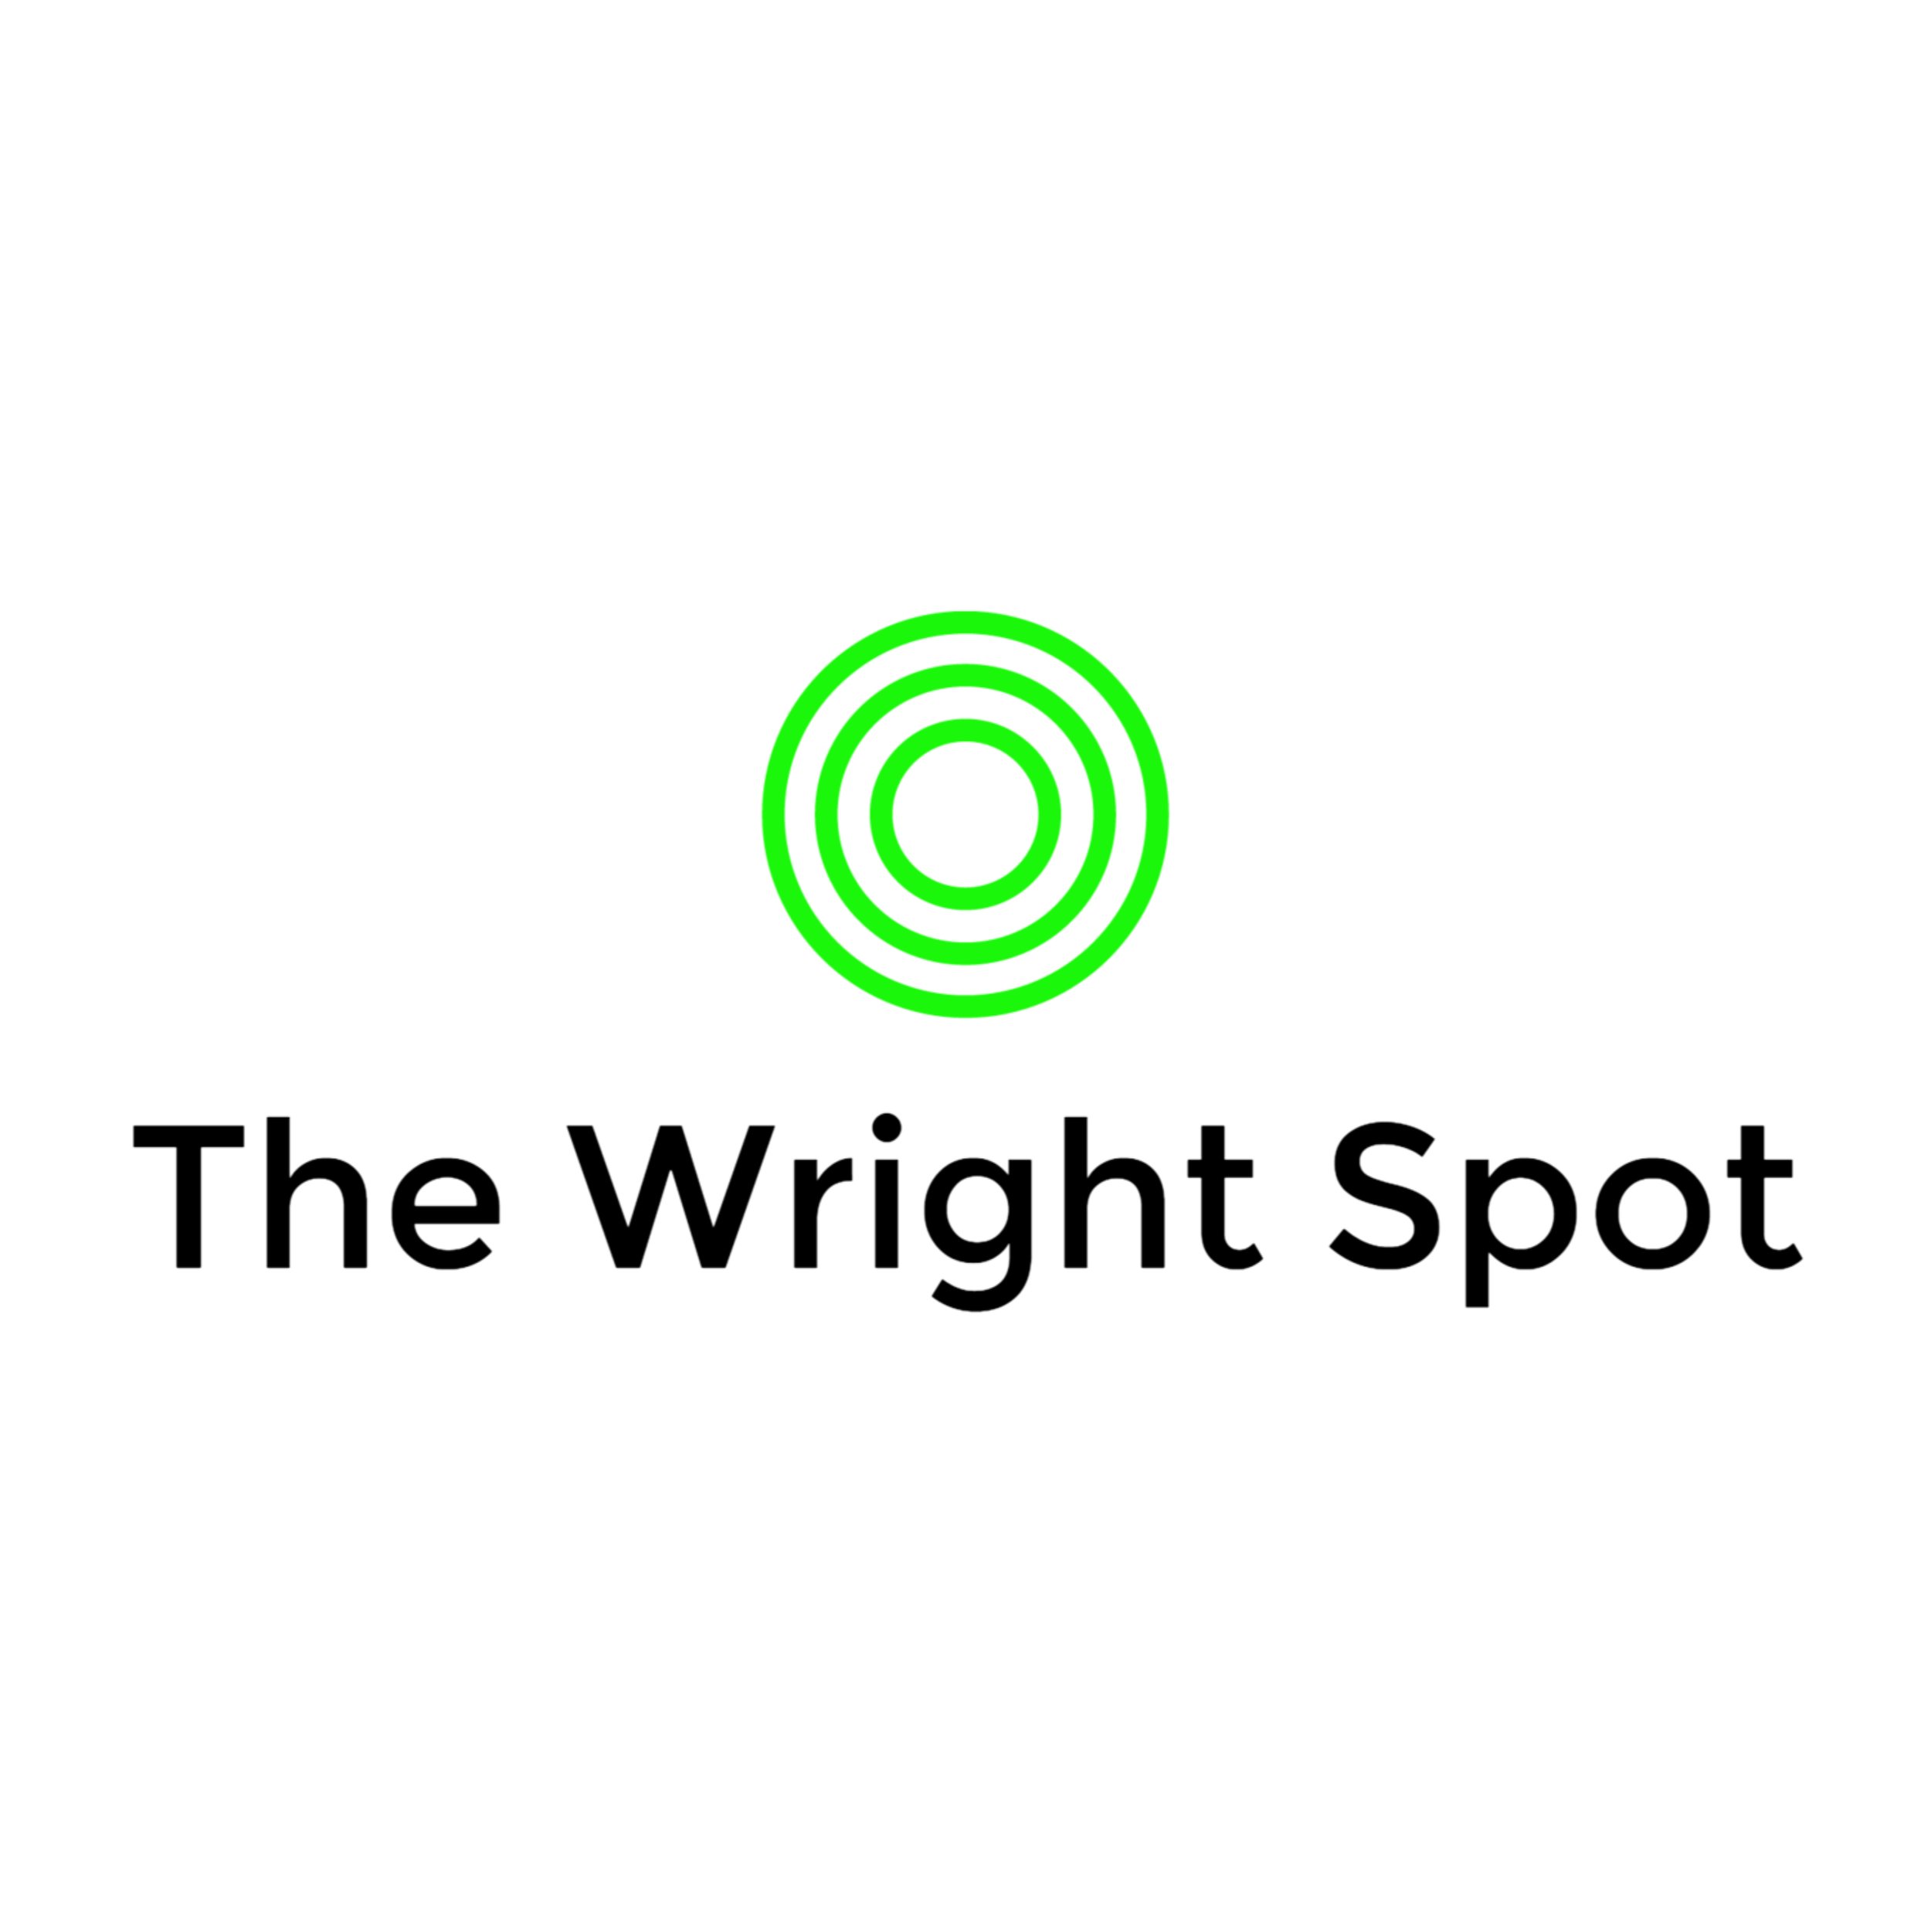 The Wright Spot